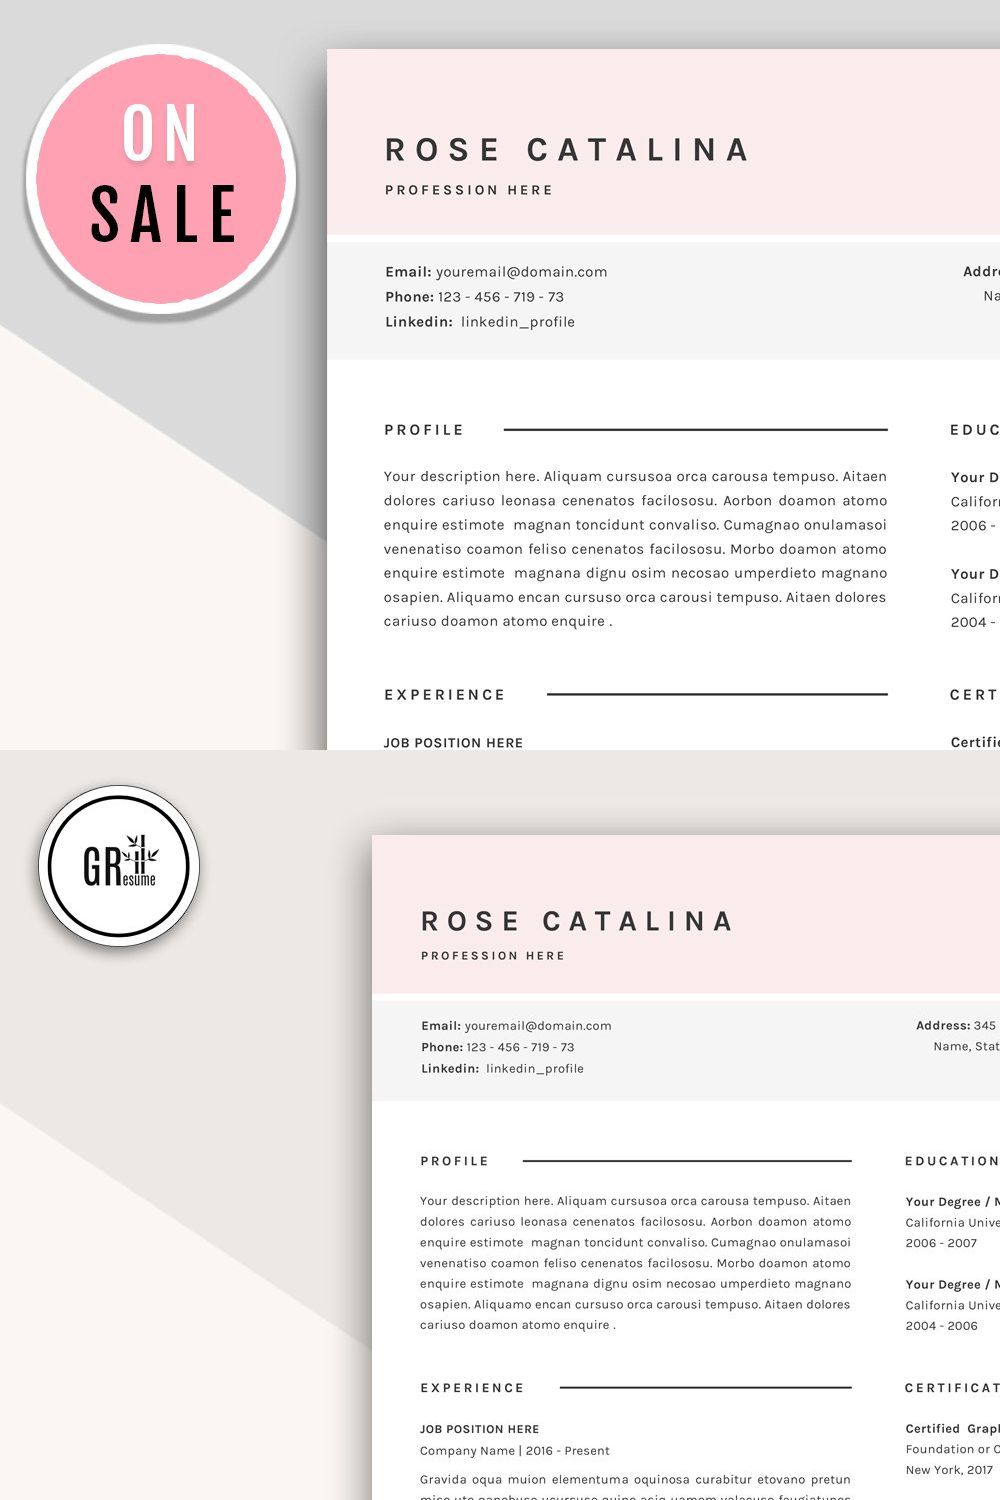 Professional Resume Template - Word pinterest preview image.